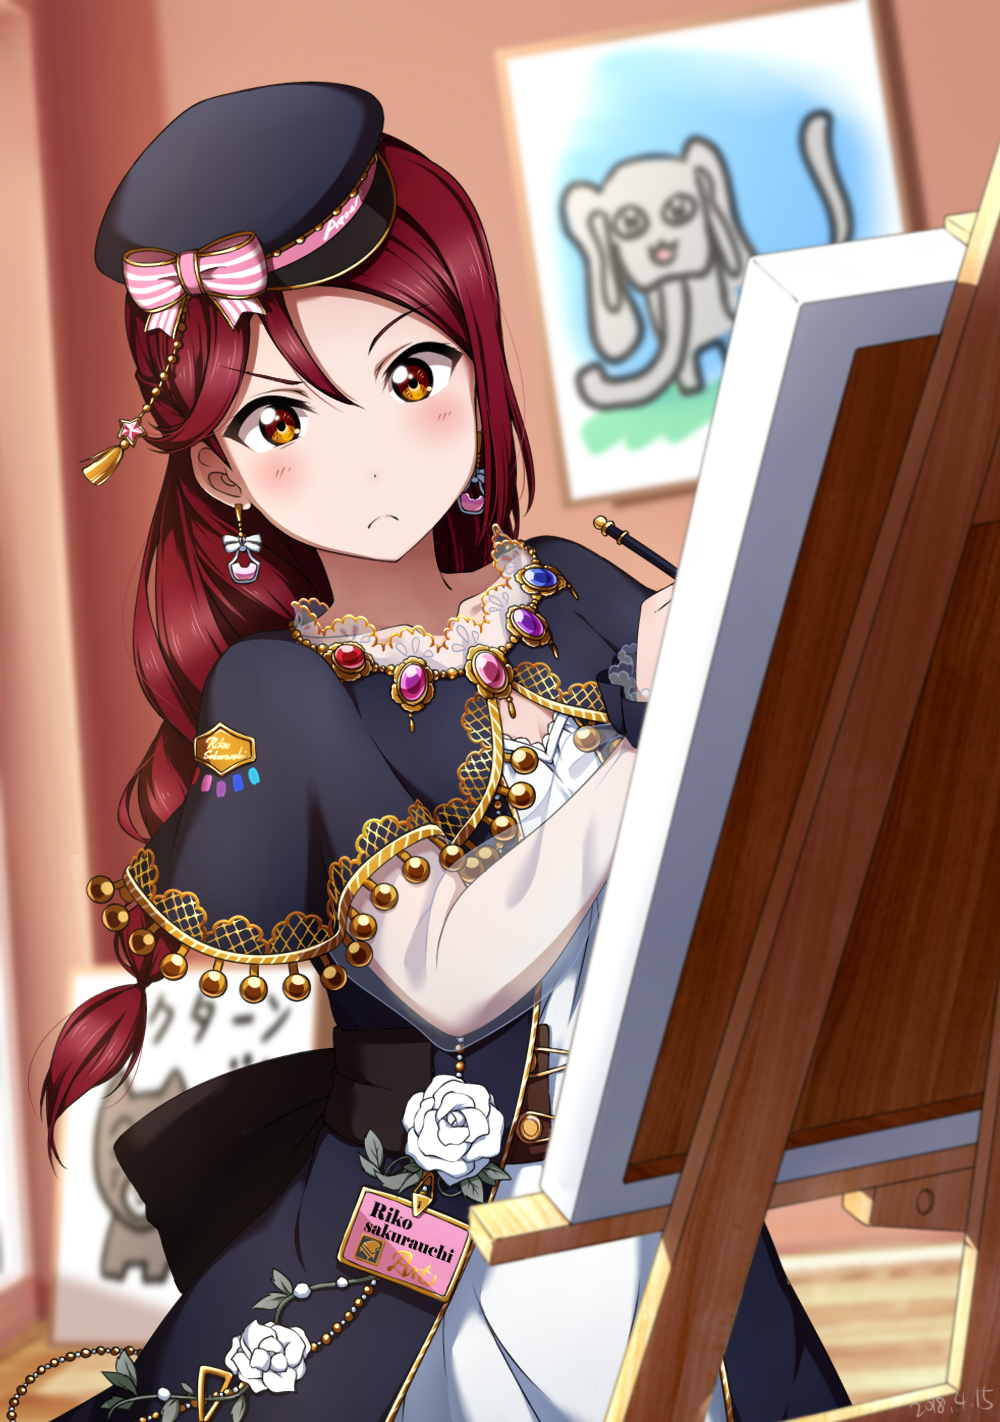 1girl aida_rikako black_hat blurry blurry_background bow braid brooch brown_eyes canvas_(object) cape character_name corset dated earrings easel elephant flower frown gem half_updo hat hat_bow highres jewelry long_hair long_sleeves looking_at_viewer love_live! love_live!_school_idol_festival love_live!_sunshine!! name_tag painting_(object) redhead robe sakurauchi_riko sash seiyuu_connection shiimai solo striped striped_bow tassel